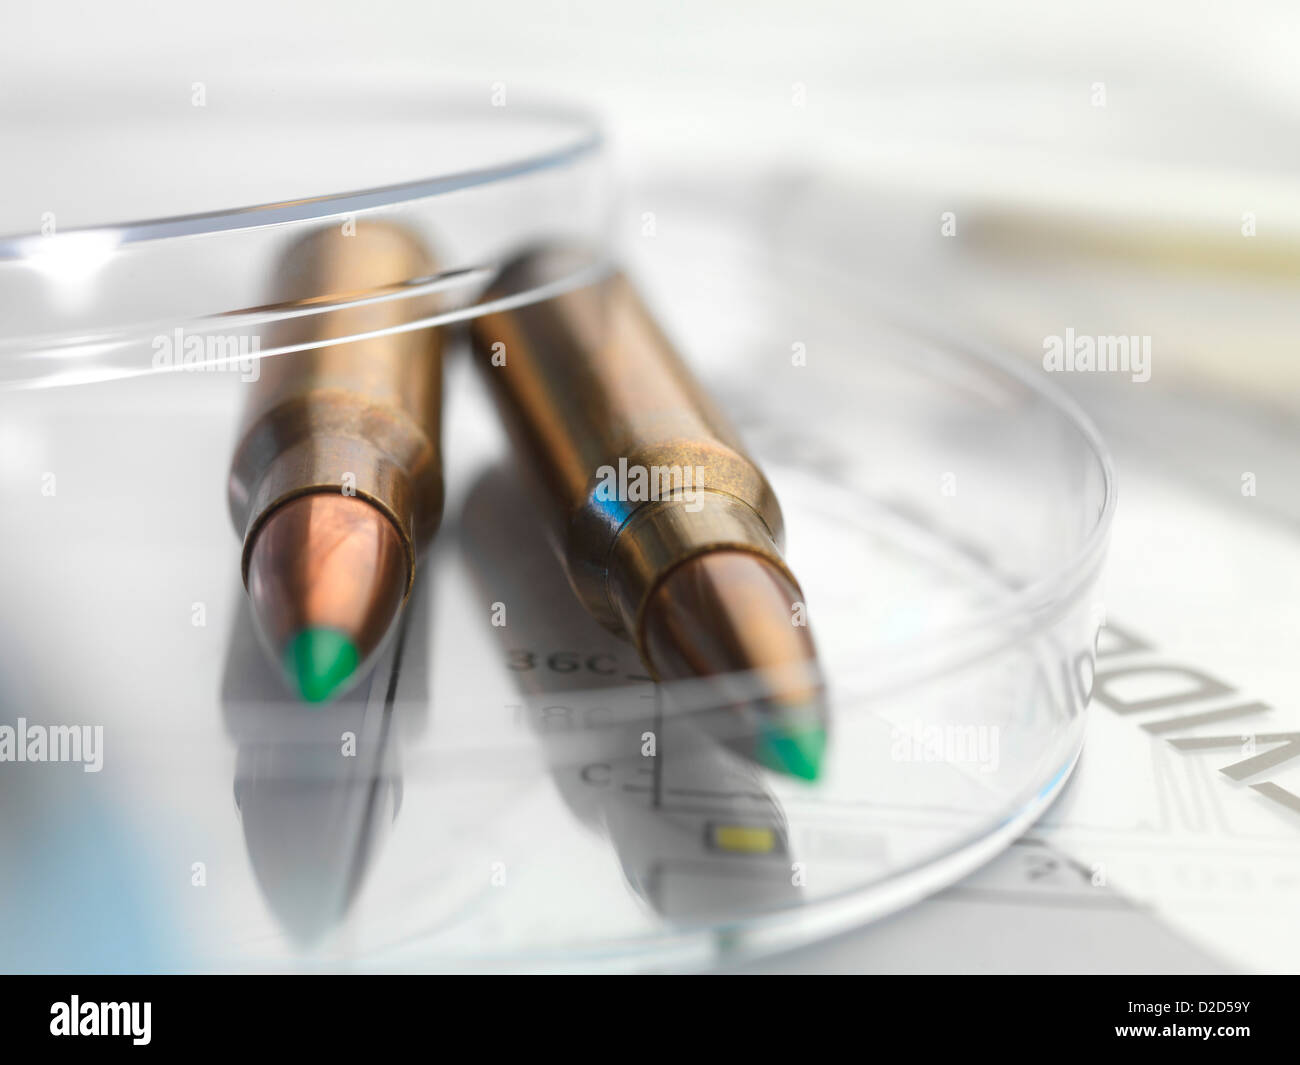 Forensic evidence Bullets in a petri dish Stock Photo